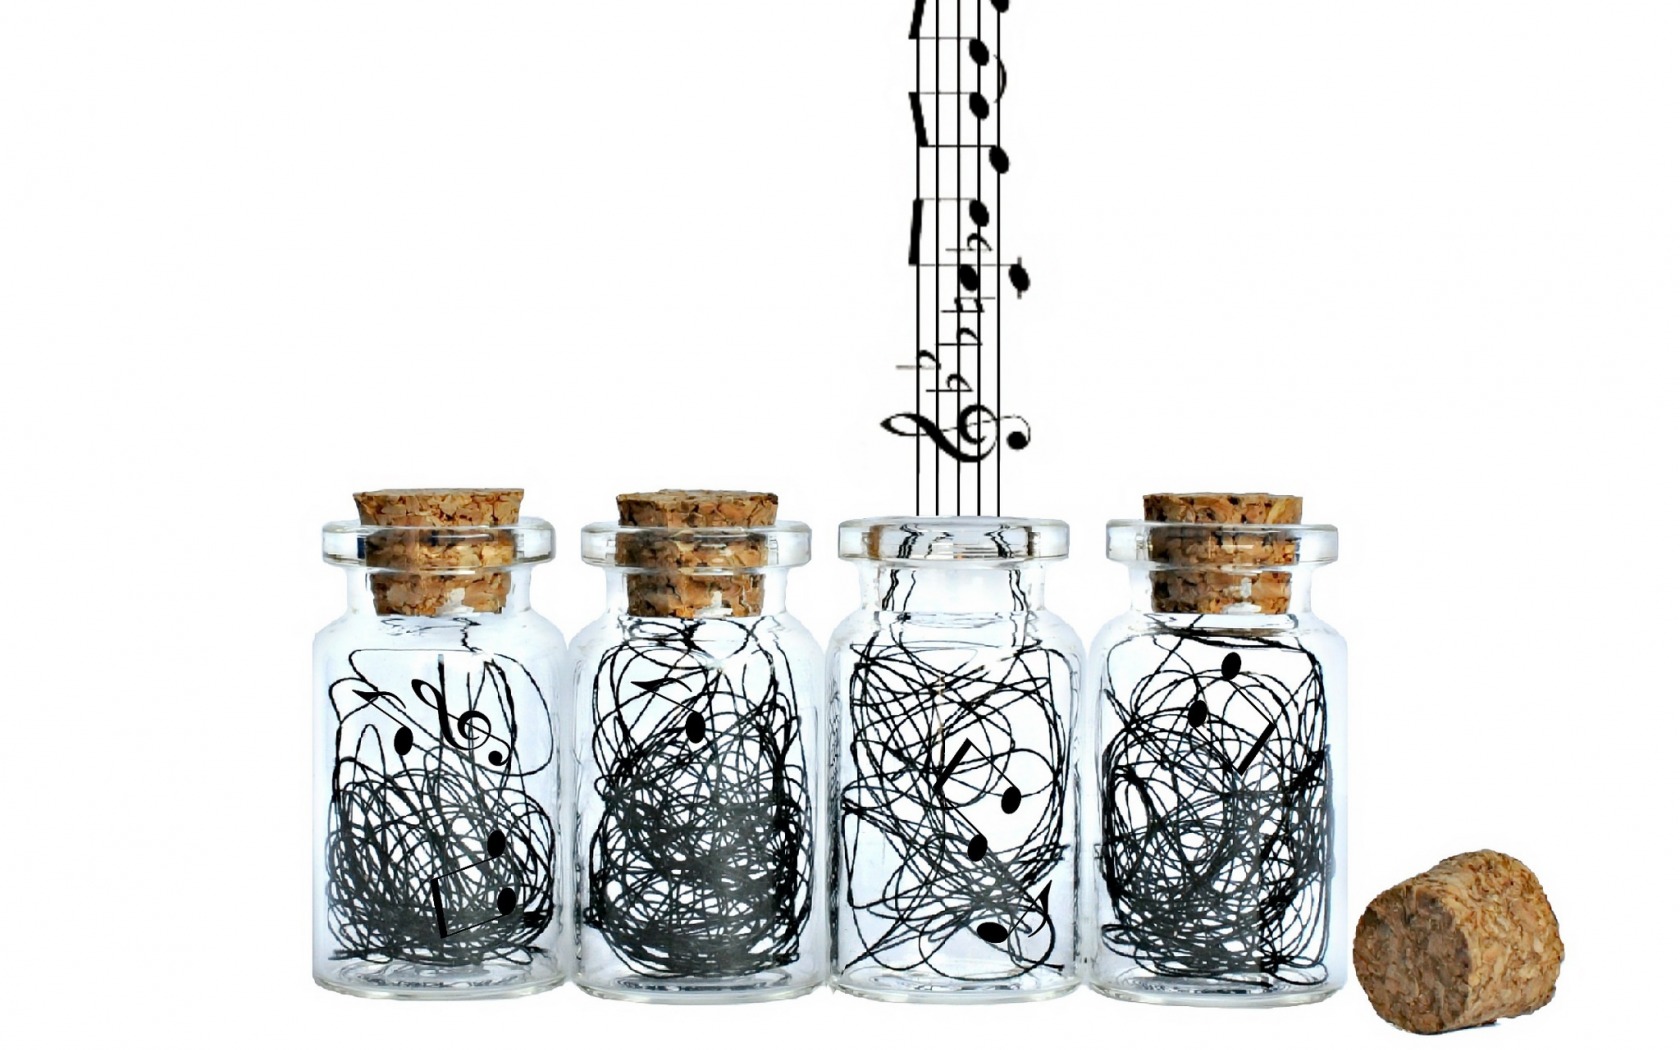 General 1680x1050 music musical notes simple background bottles white background